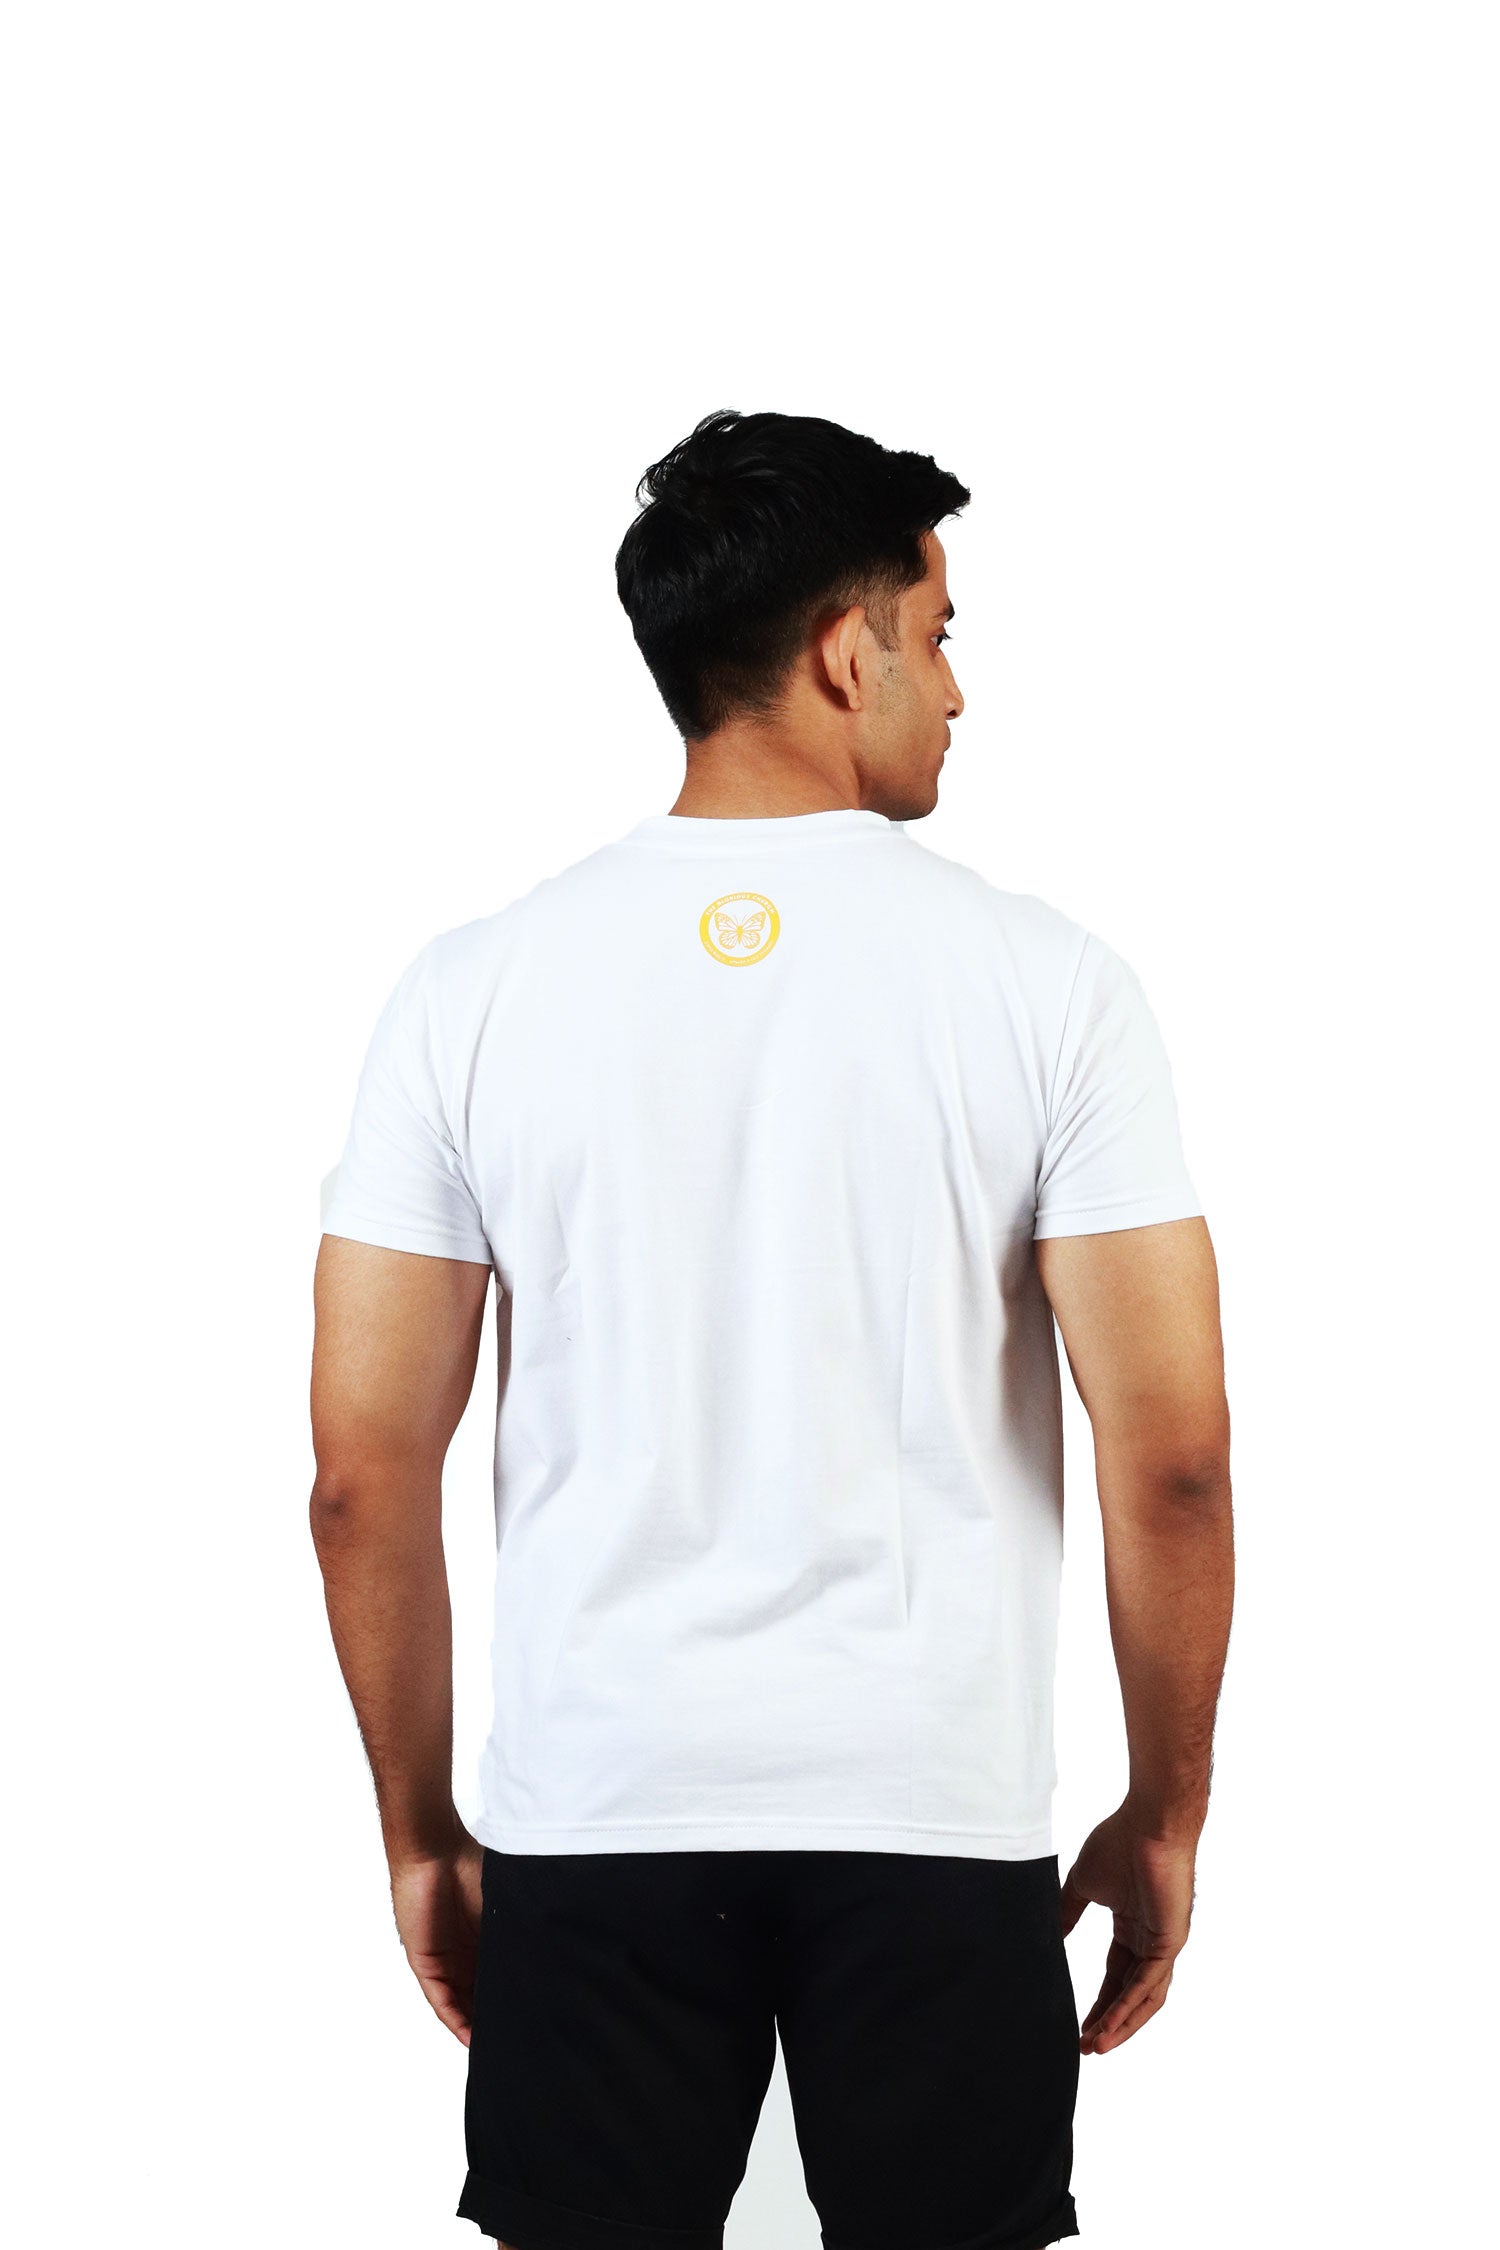 Lion's Tribe is the Winning Tribe - White - Unisex